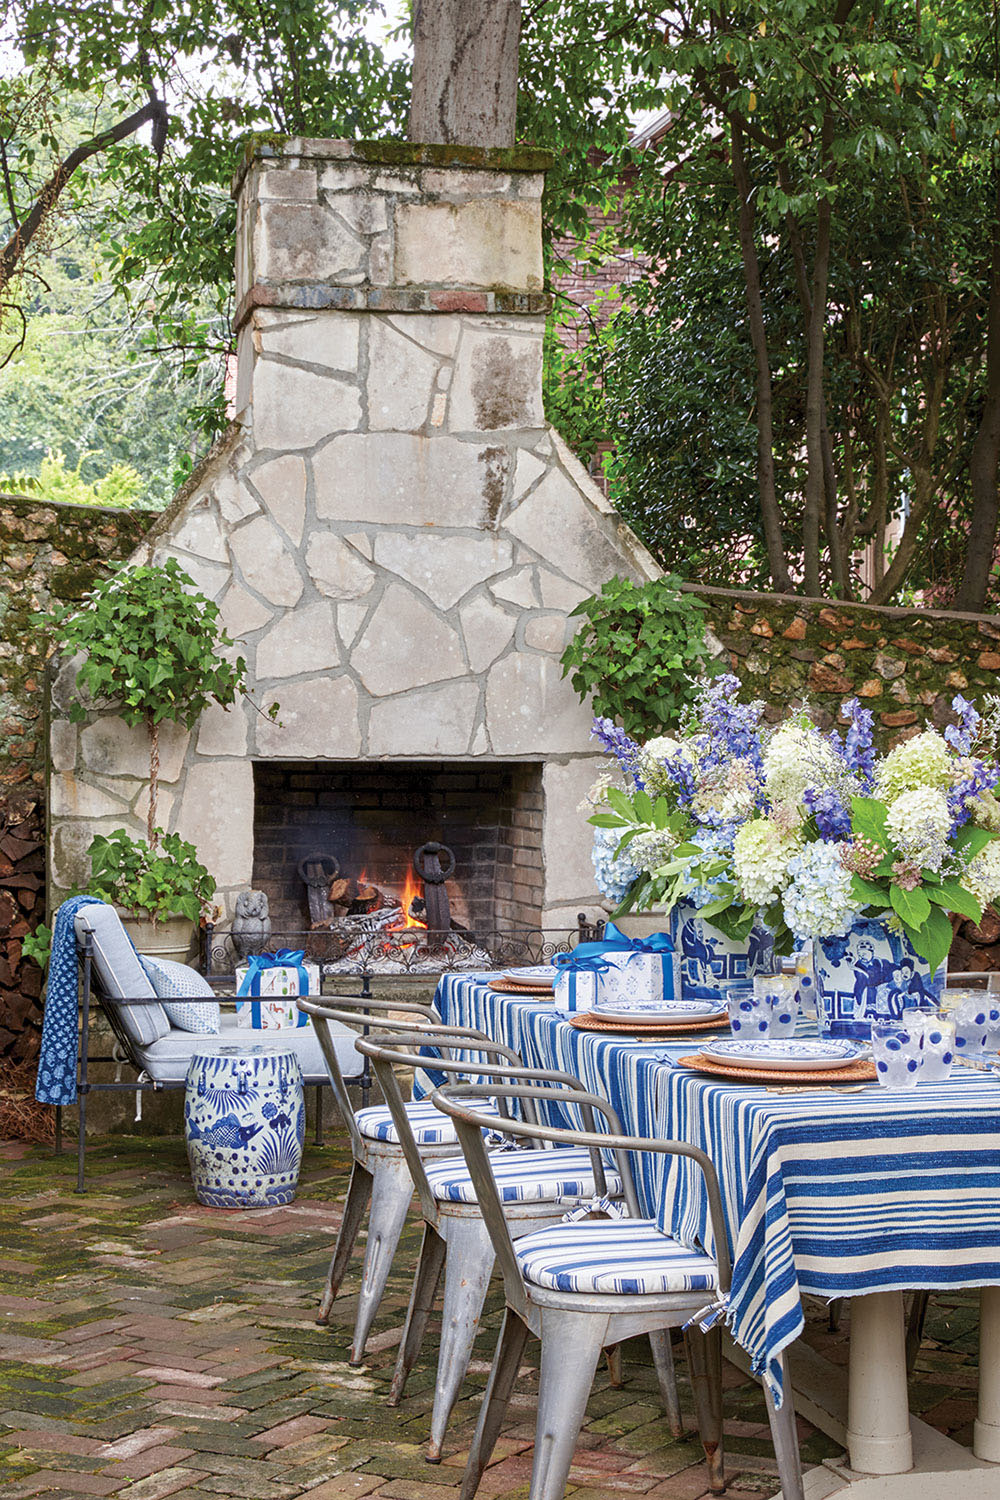 Another view of the outdoor table shows metal dining chairs with blue-and-white striped seats and an outdoor stone fireplace with a roaring fire.